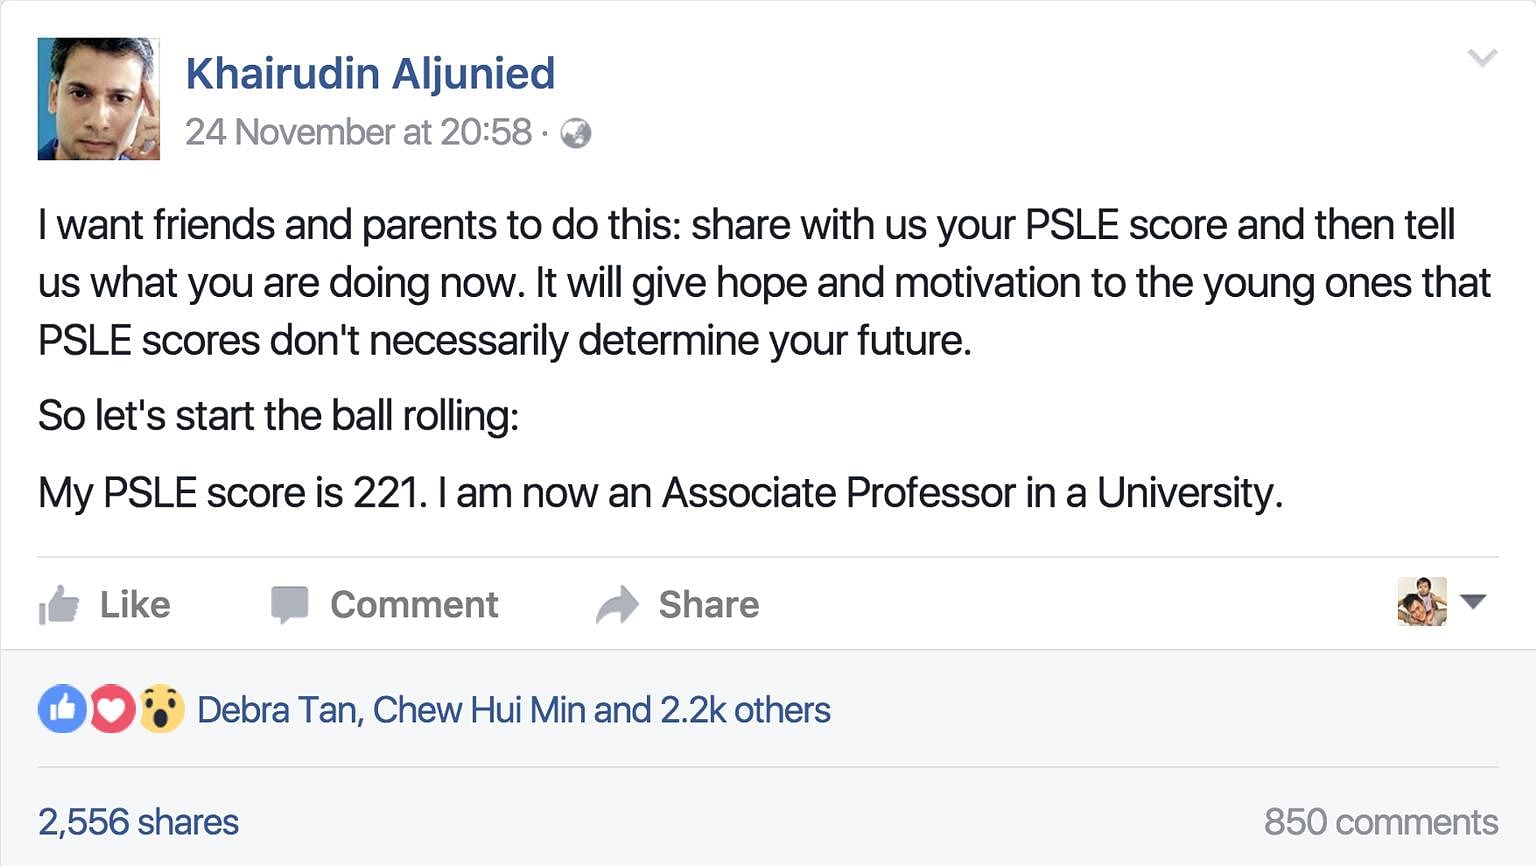 Facebook user Khairudin Aljunied urged friends and parents to share their PSLE scores and their current occupation. The aim is to tell pupils that exam results do not necessarily reflect what they are capable of achieving in life. People have been po